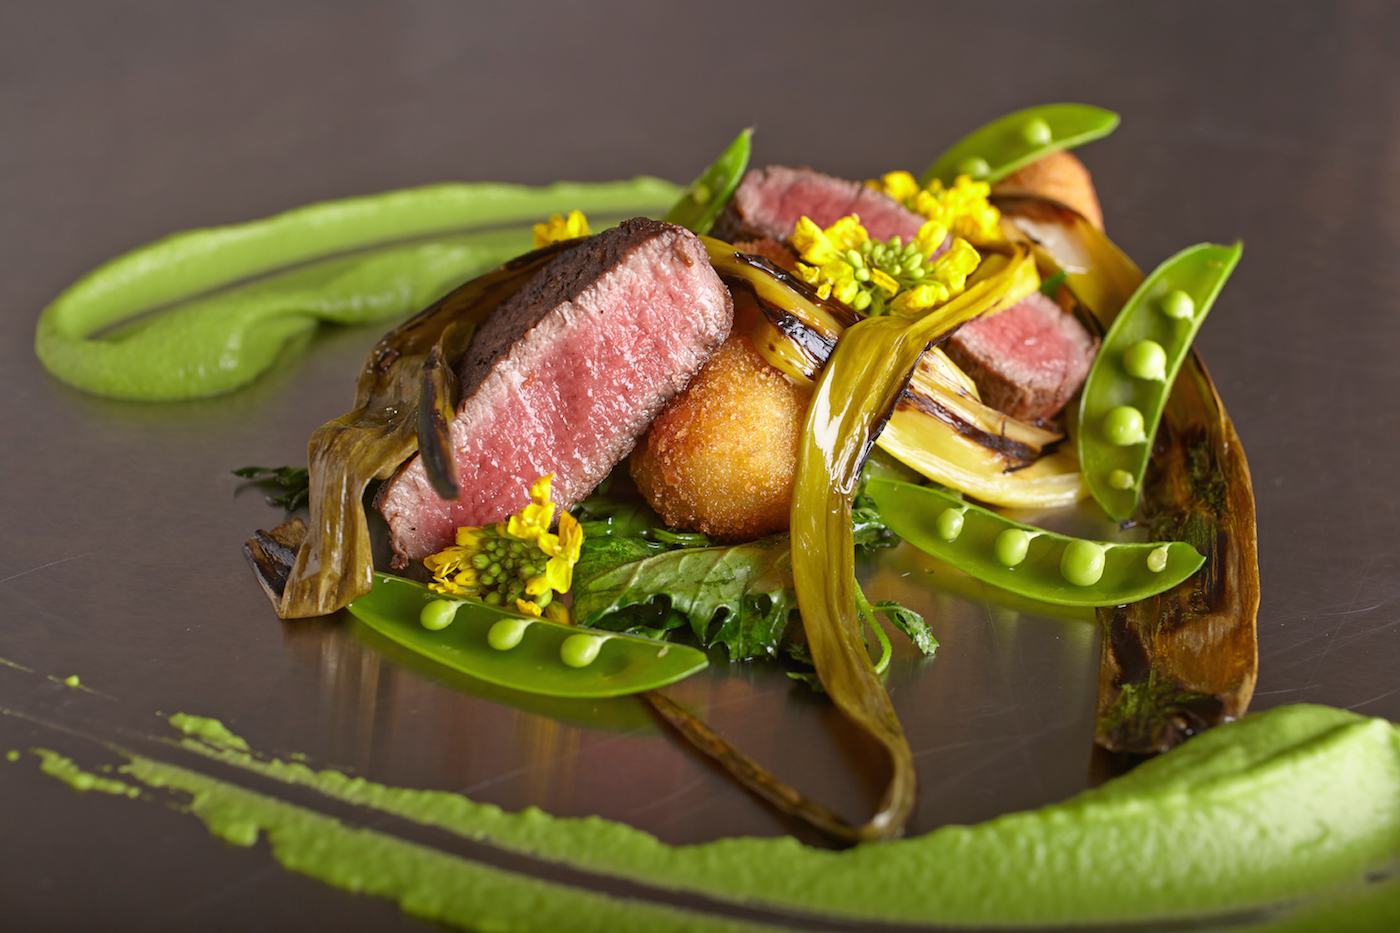 Filet mignon- sustainably sourced cuisine from global gourmet